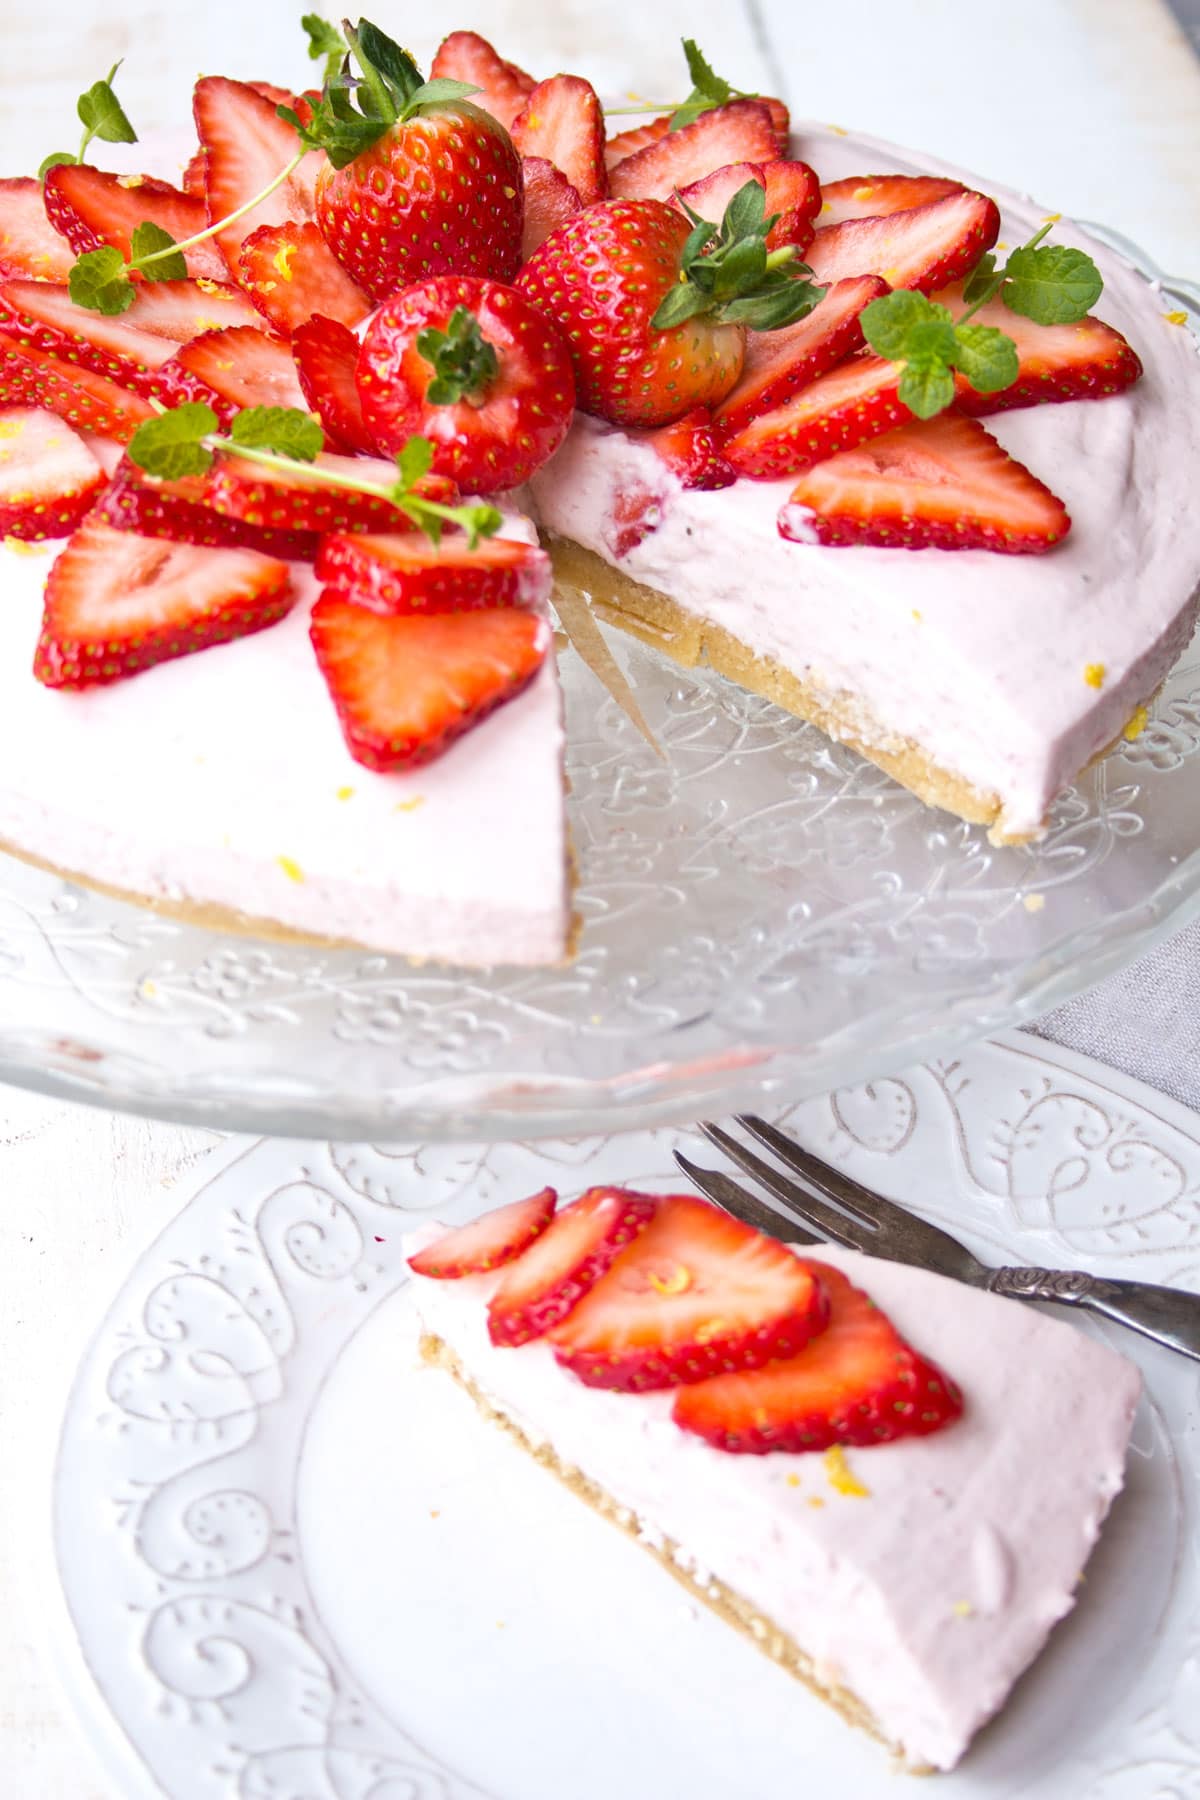 A strawberry cheesecake on a cake stand and a slice of cheesecake on a plate.